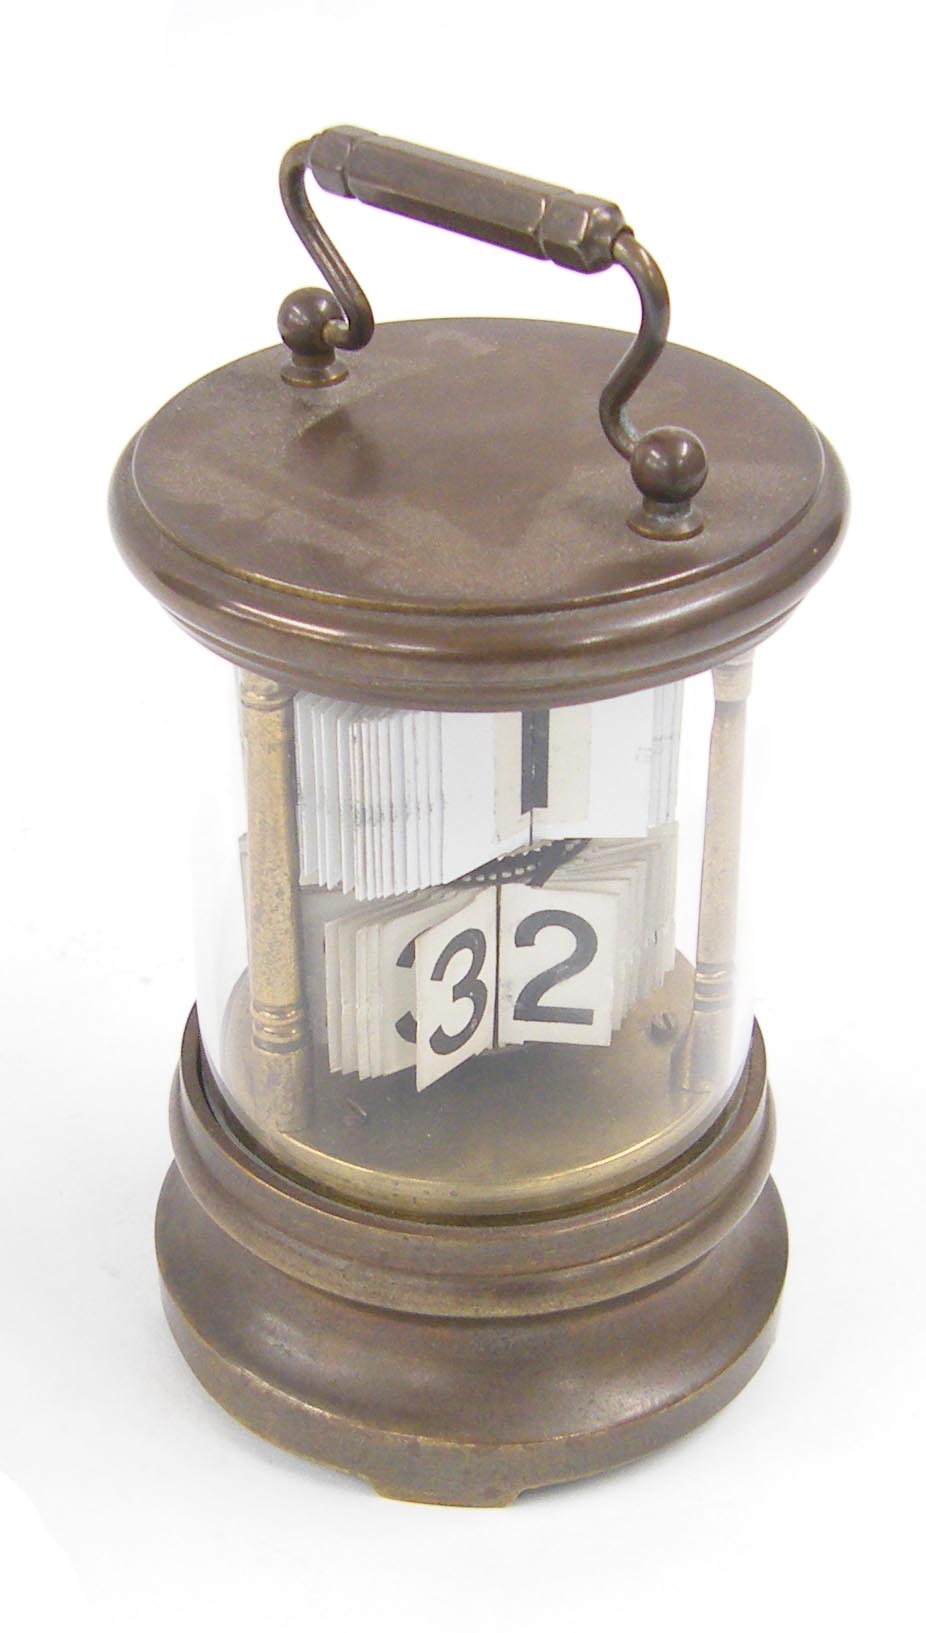 Cylindrical brass ticket clock with carrying handle, 6.5" high